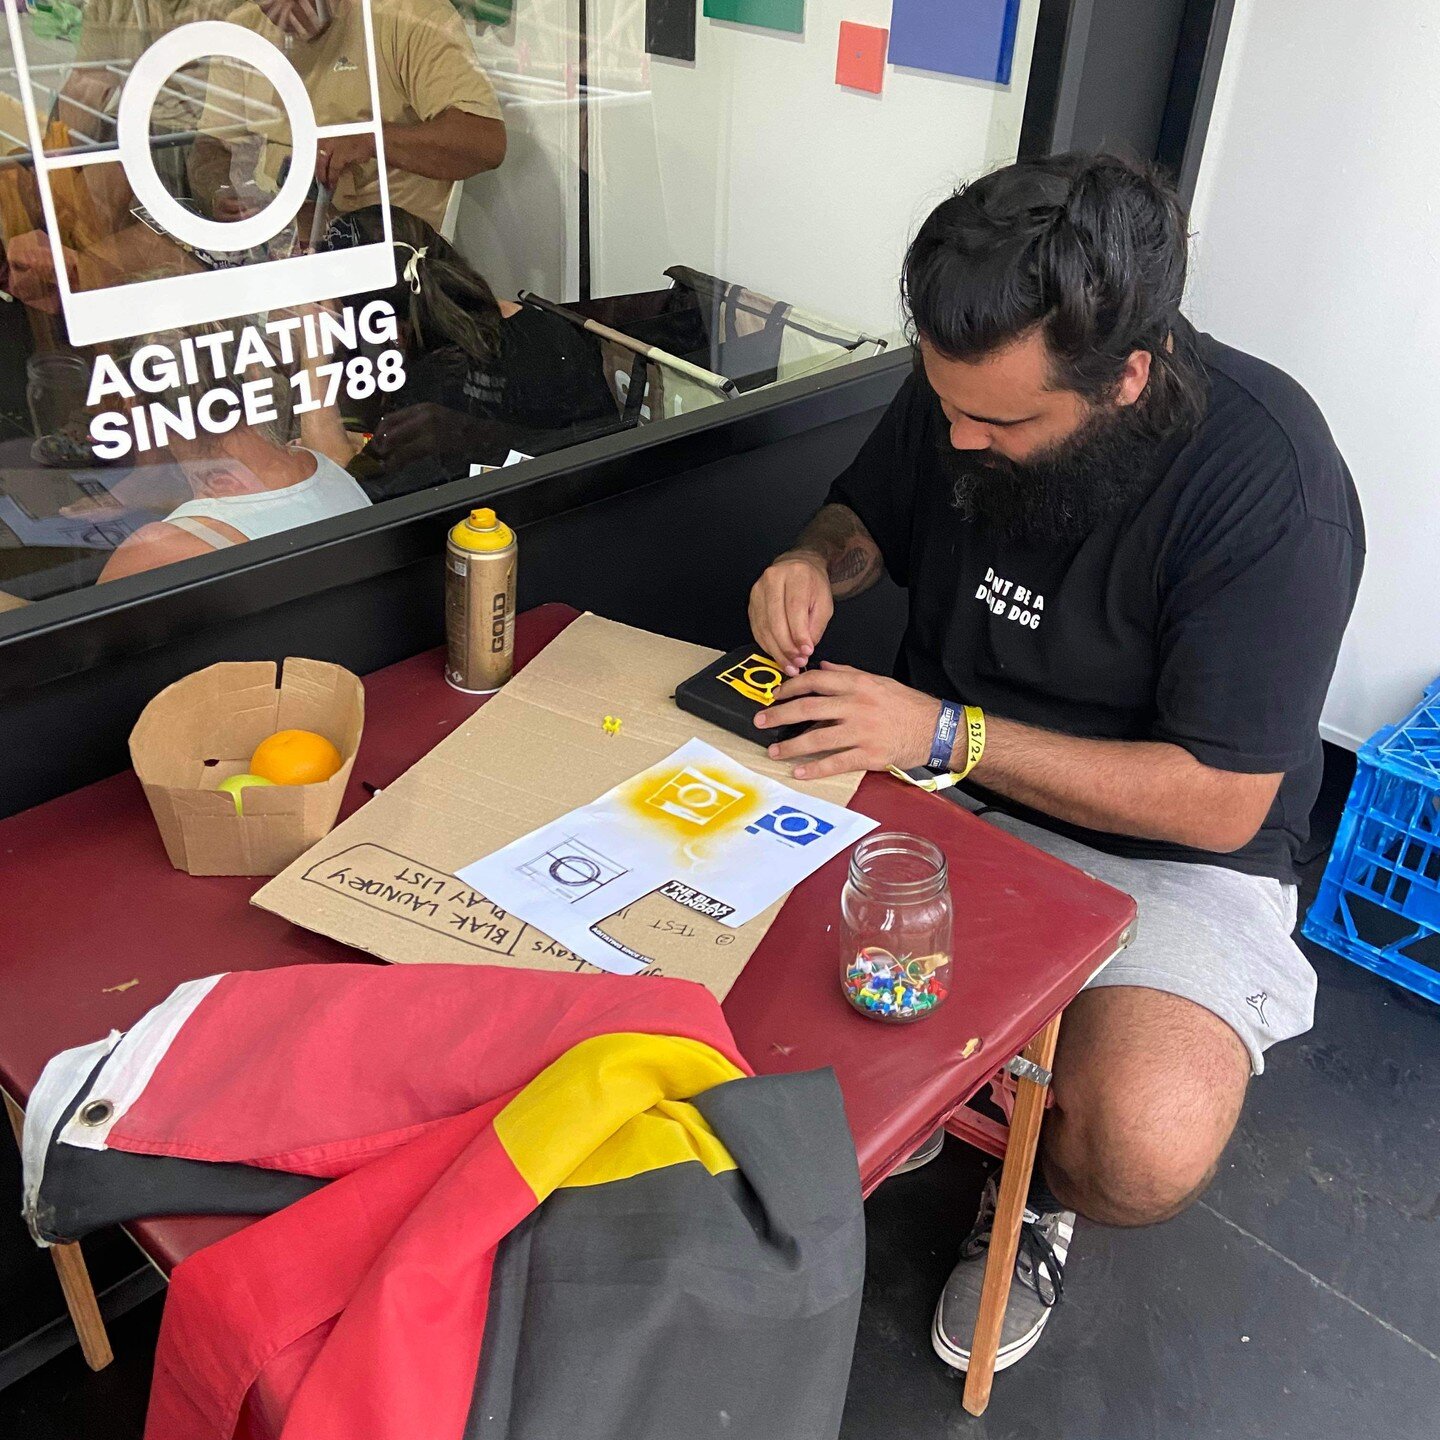 We had a few pop-ups in the Laundry during the @woodfordfolkfestival, but none more as low key and solid as the work of @dmb_mk2, who was quietly there stenciling, making, yarning, and being a really important part of all the goings on. Thanks brothe